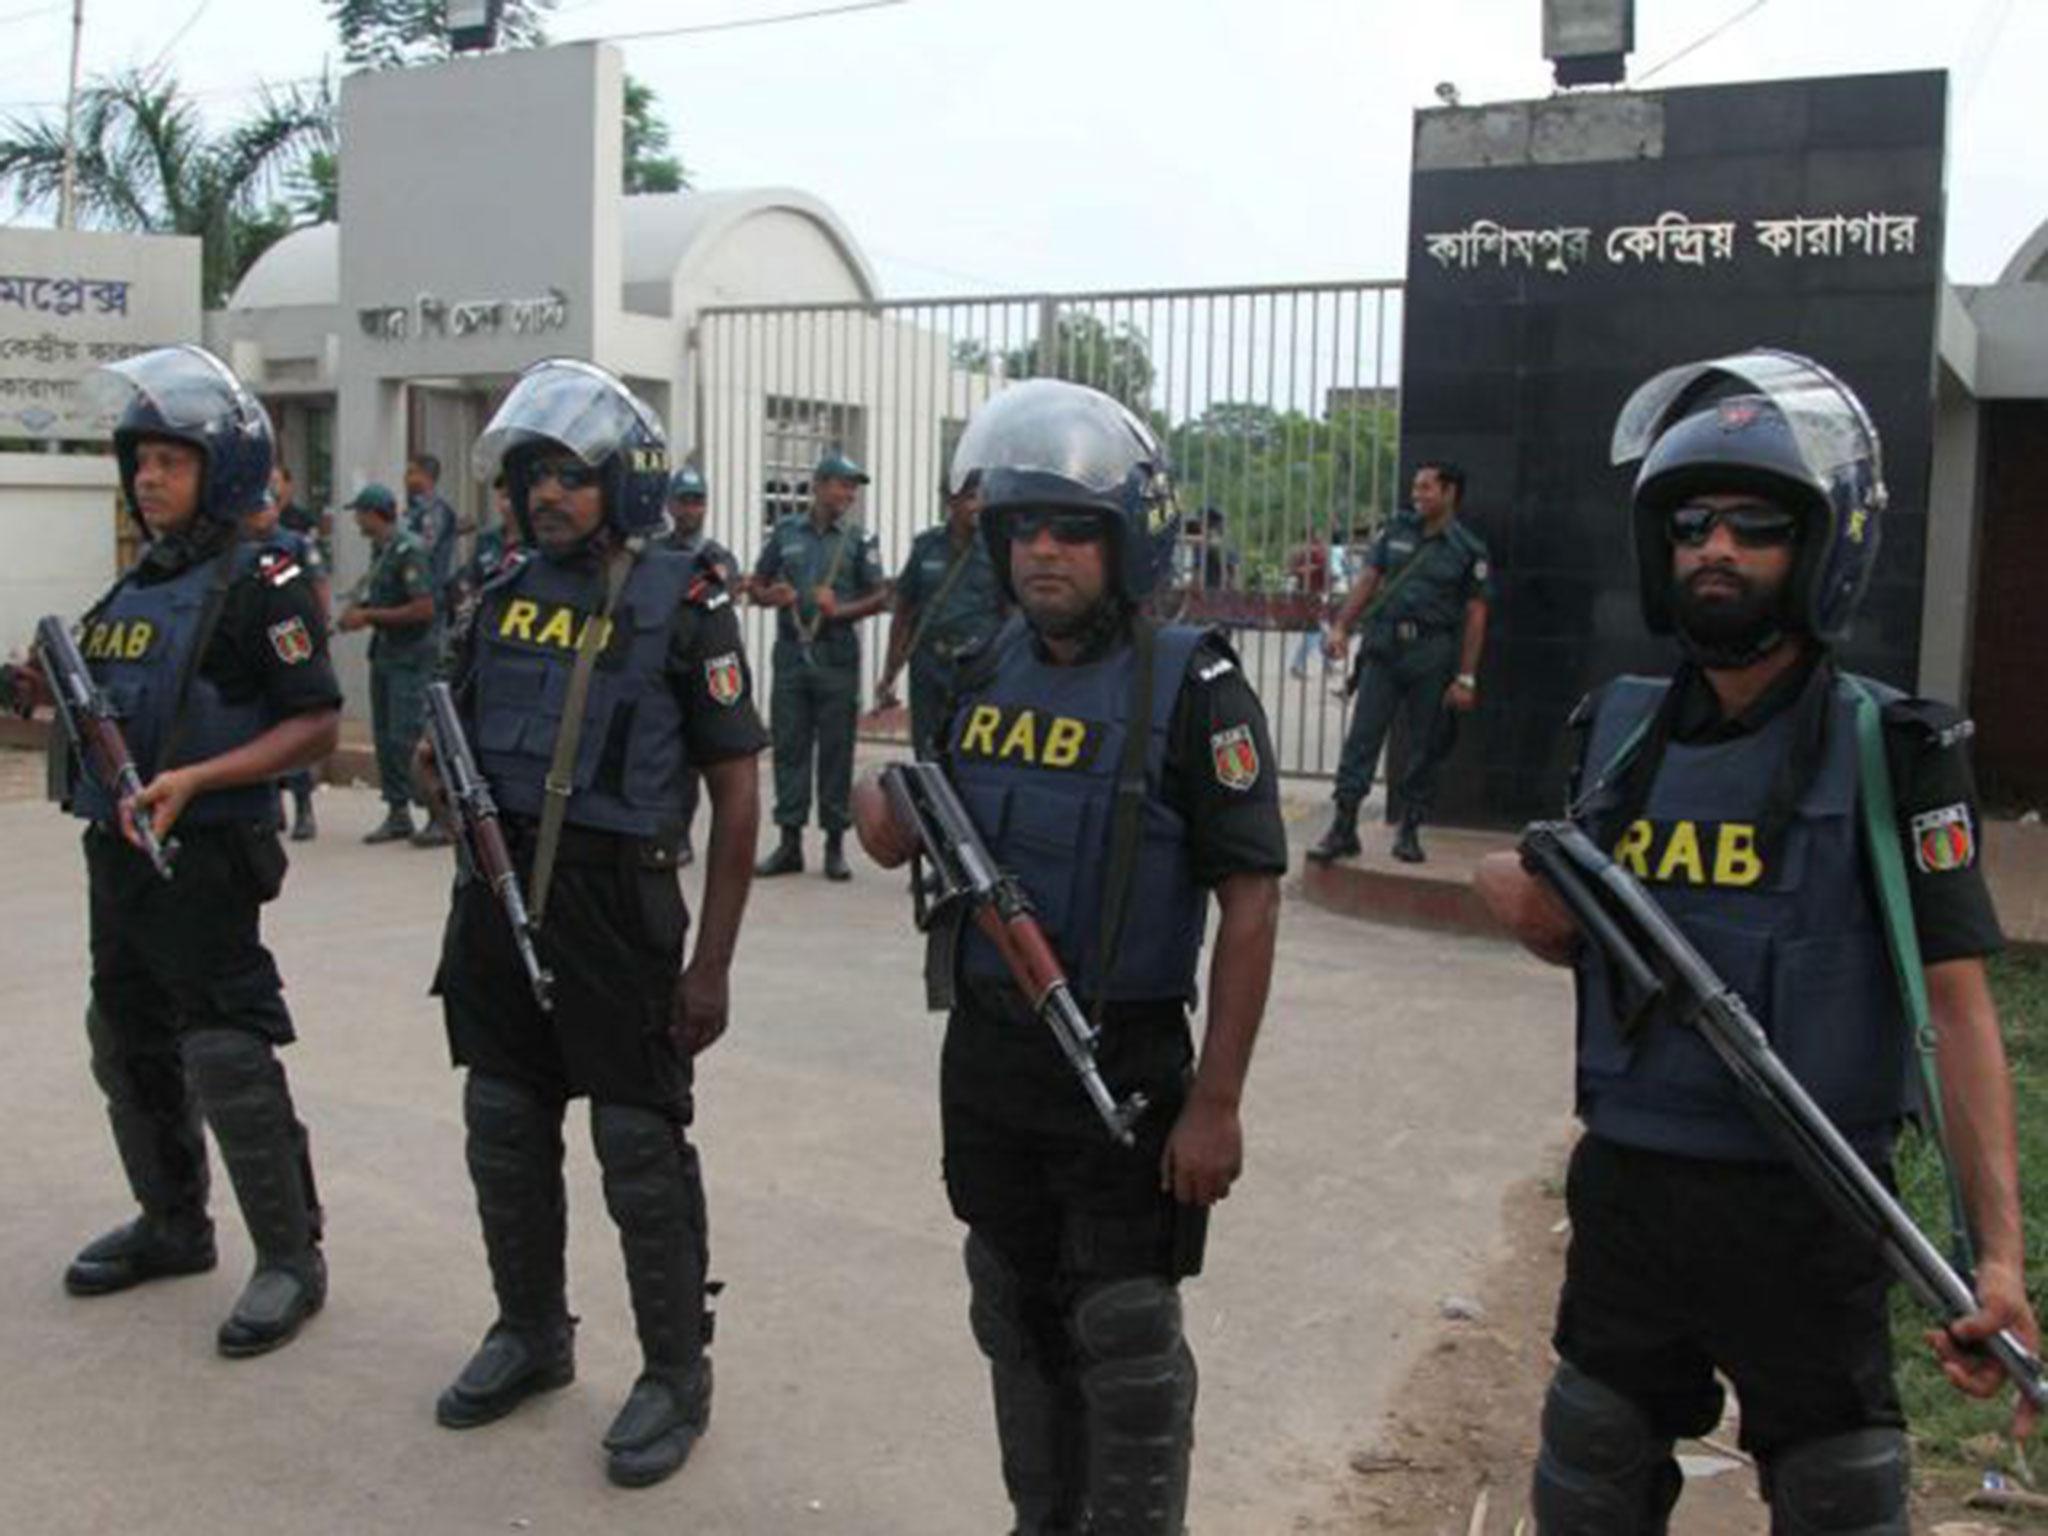 Bangladeshi security personnel stand guard at the entrance of the Kashimpur Central Jail where Bangladeshi leader of Jamaat-e-Islam Mir Quasem Ali was held before his execution